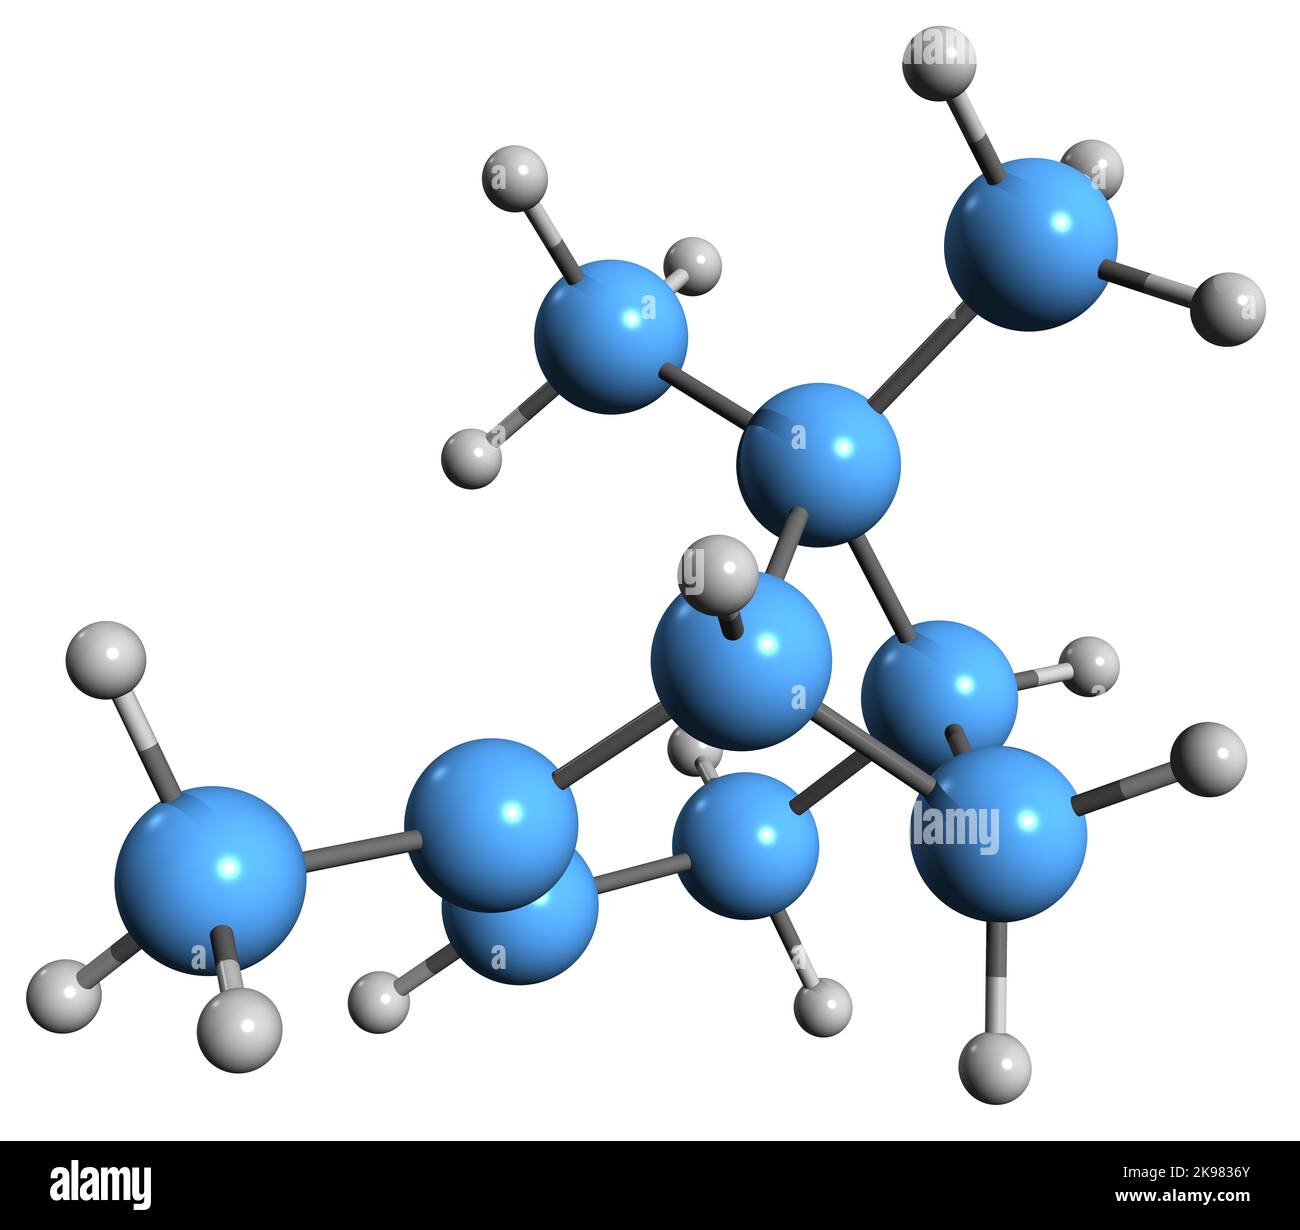 3D image of alpha-Pinene skeletal formula - molecular chemical structure of rosemary essential oil compound isolated on white background Stock Photo